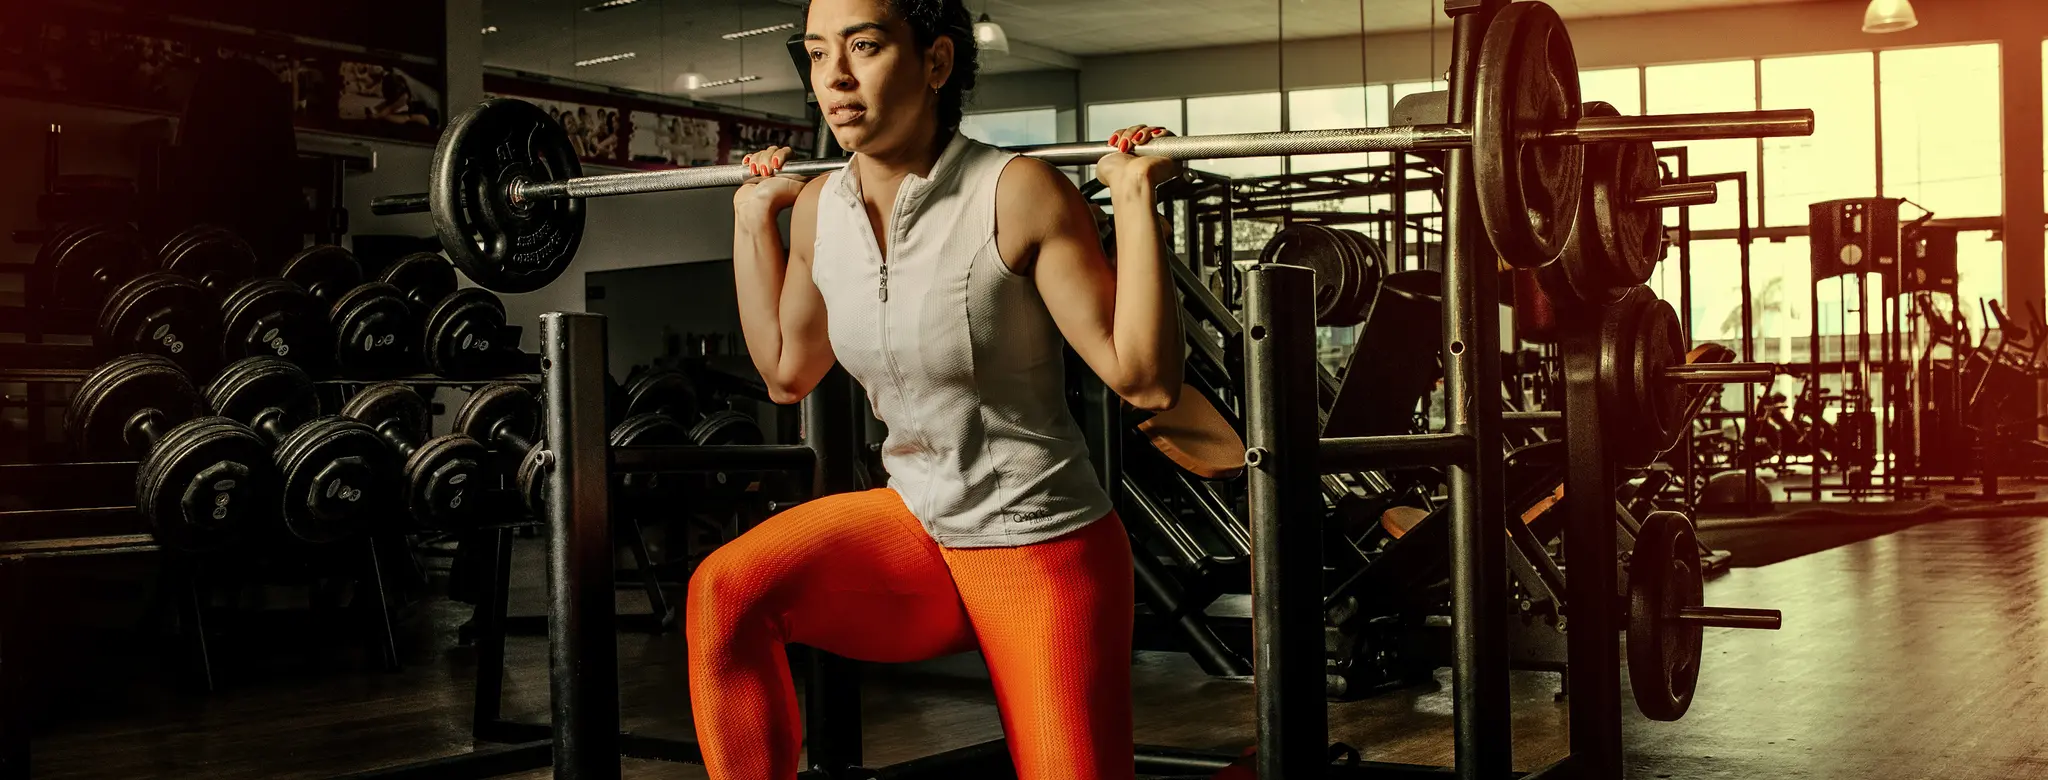 woman in orange pants lifting weights at gym